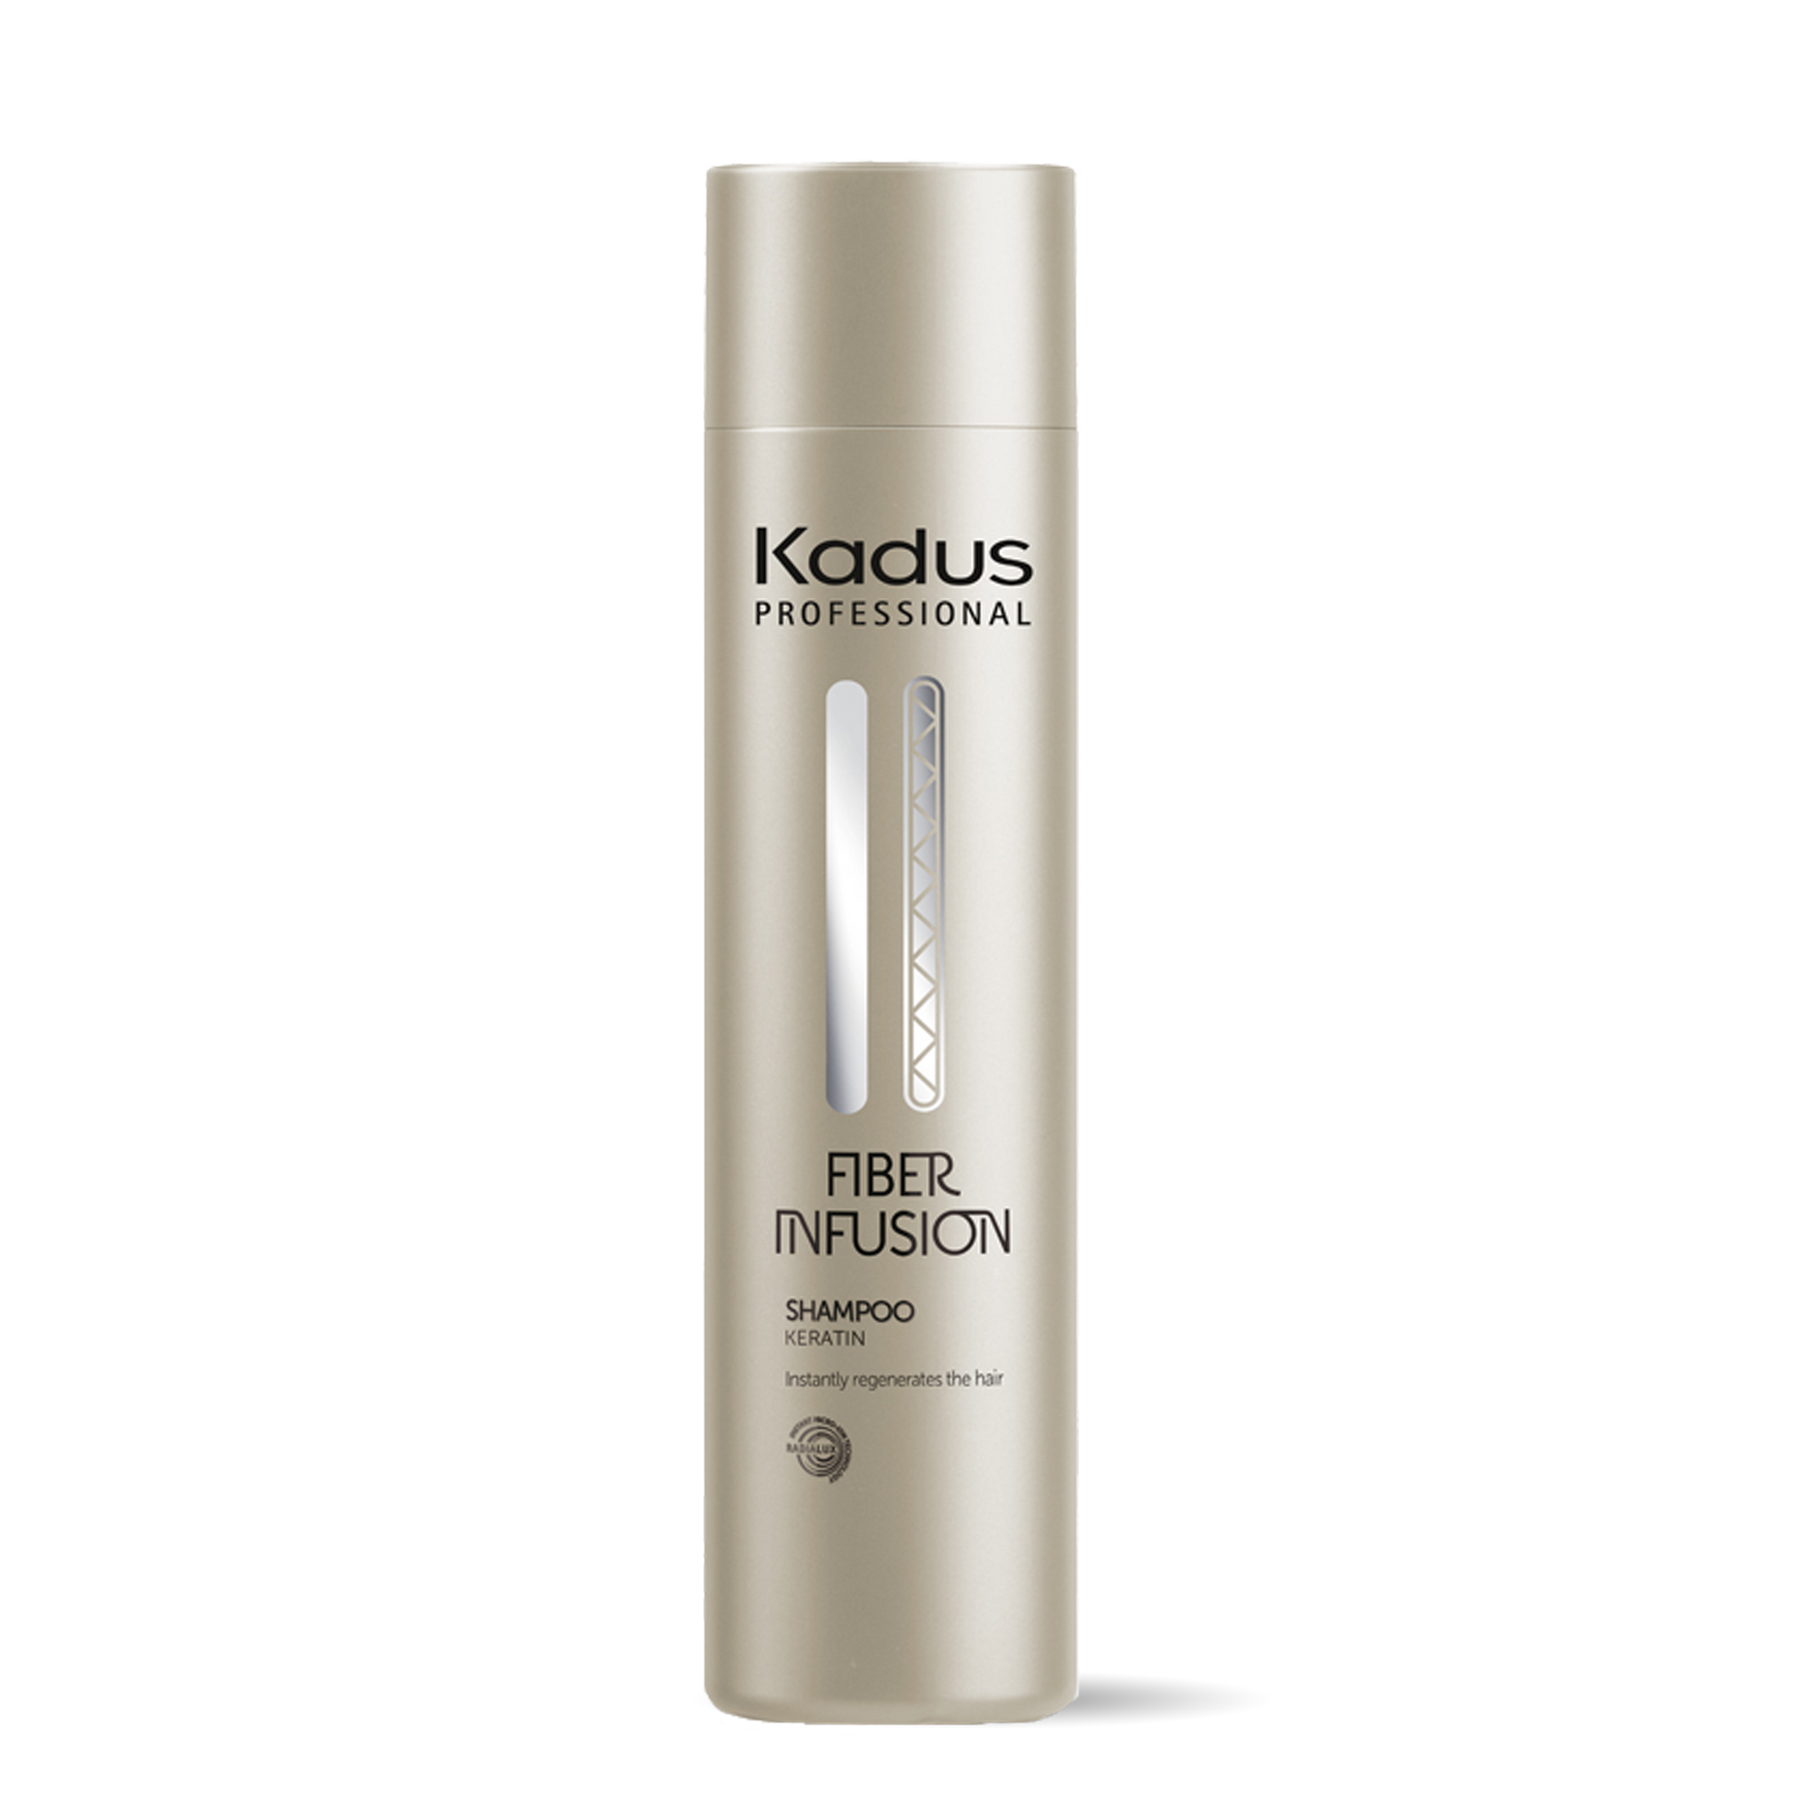 Kadus Fiber Infusion Shampoo 250ml - by Kadus Professionals |ProCare Outlet|